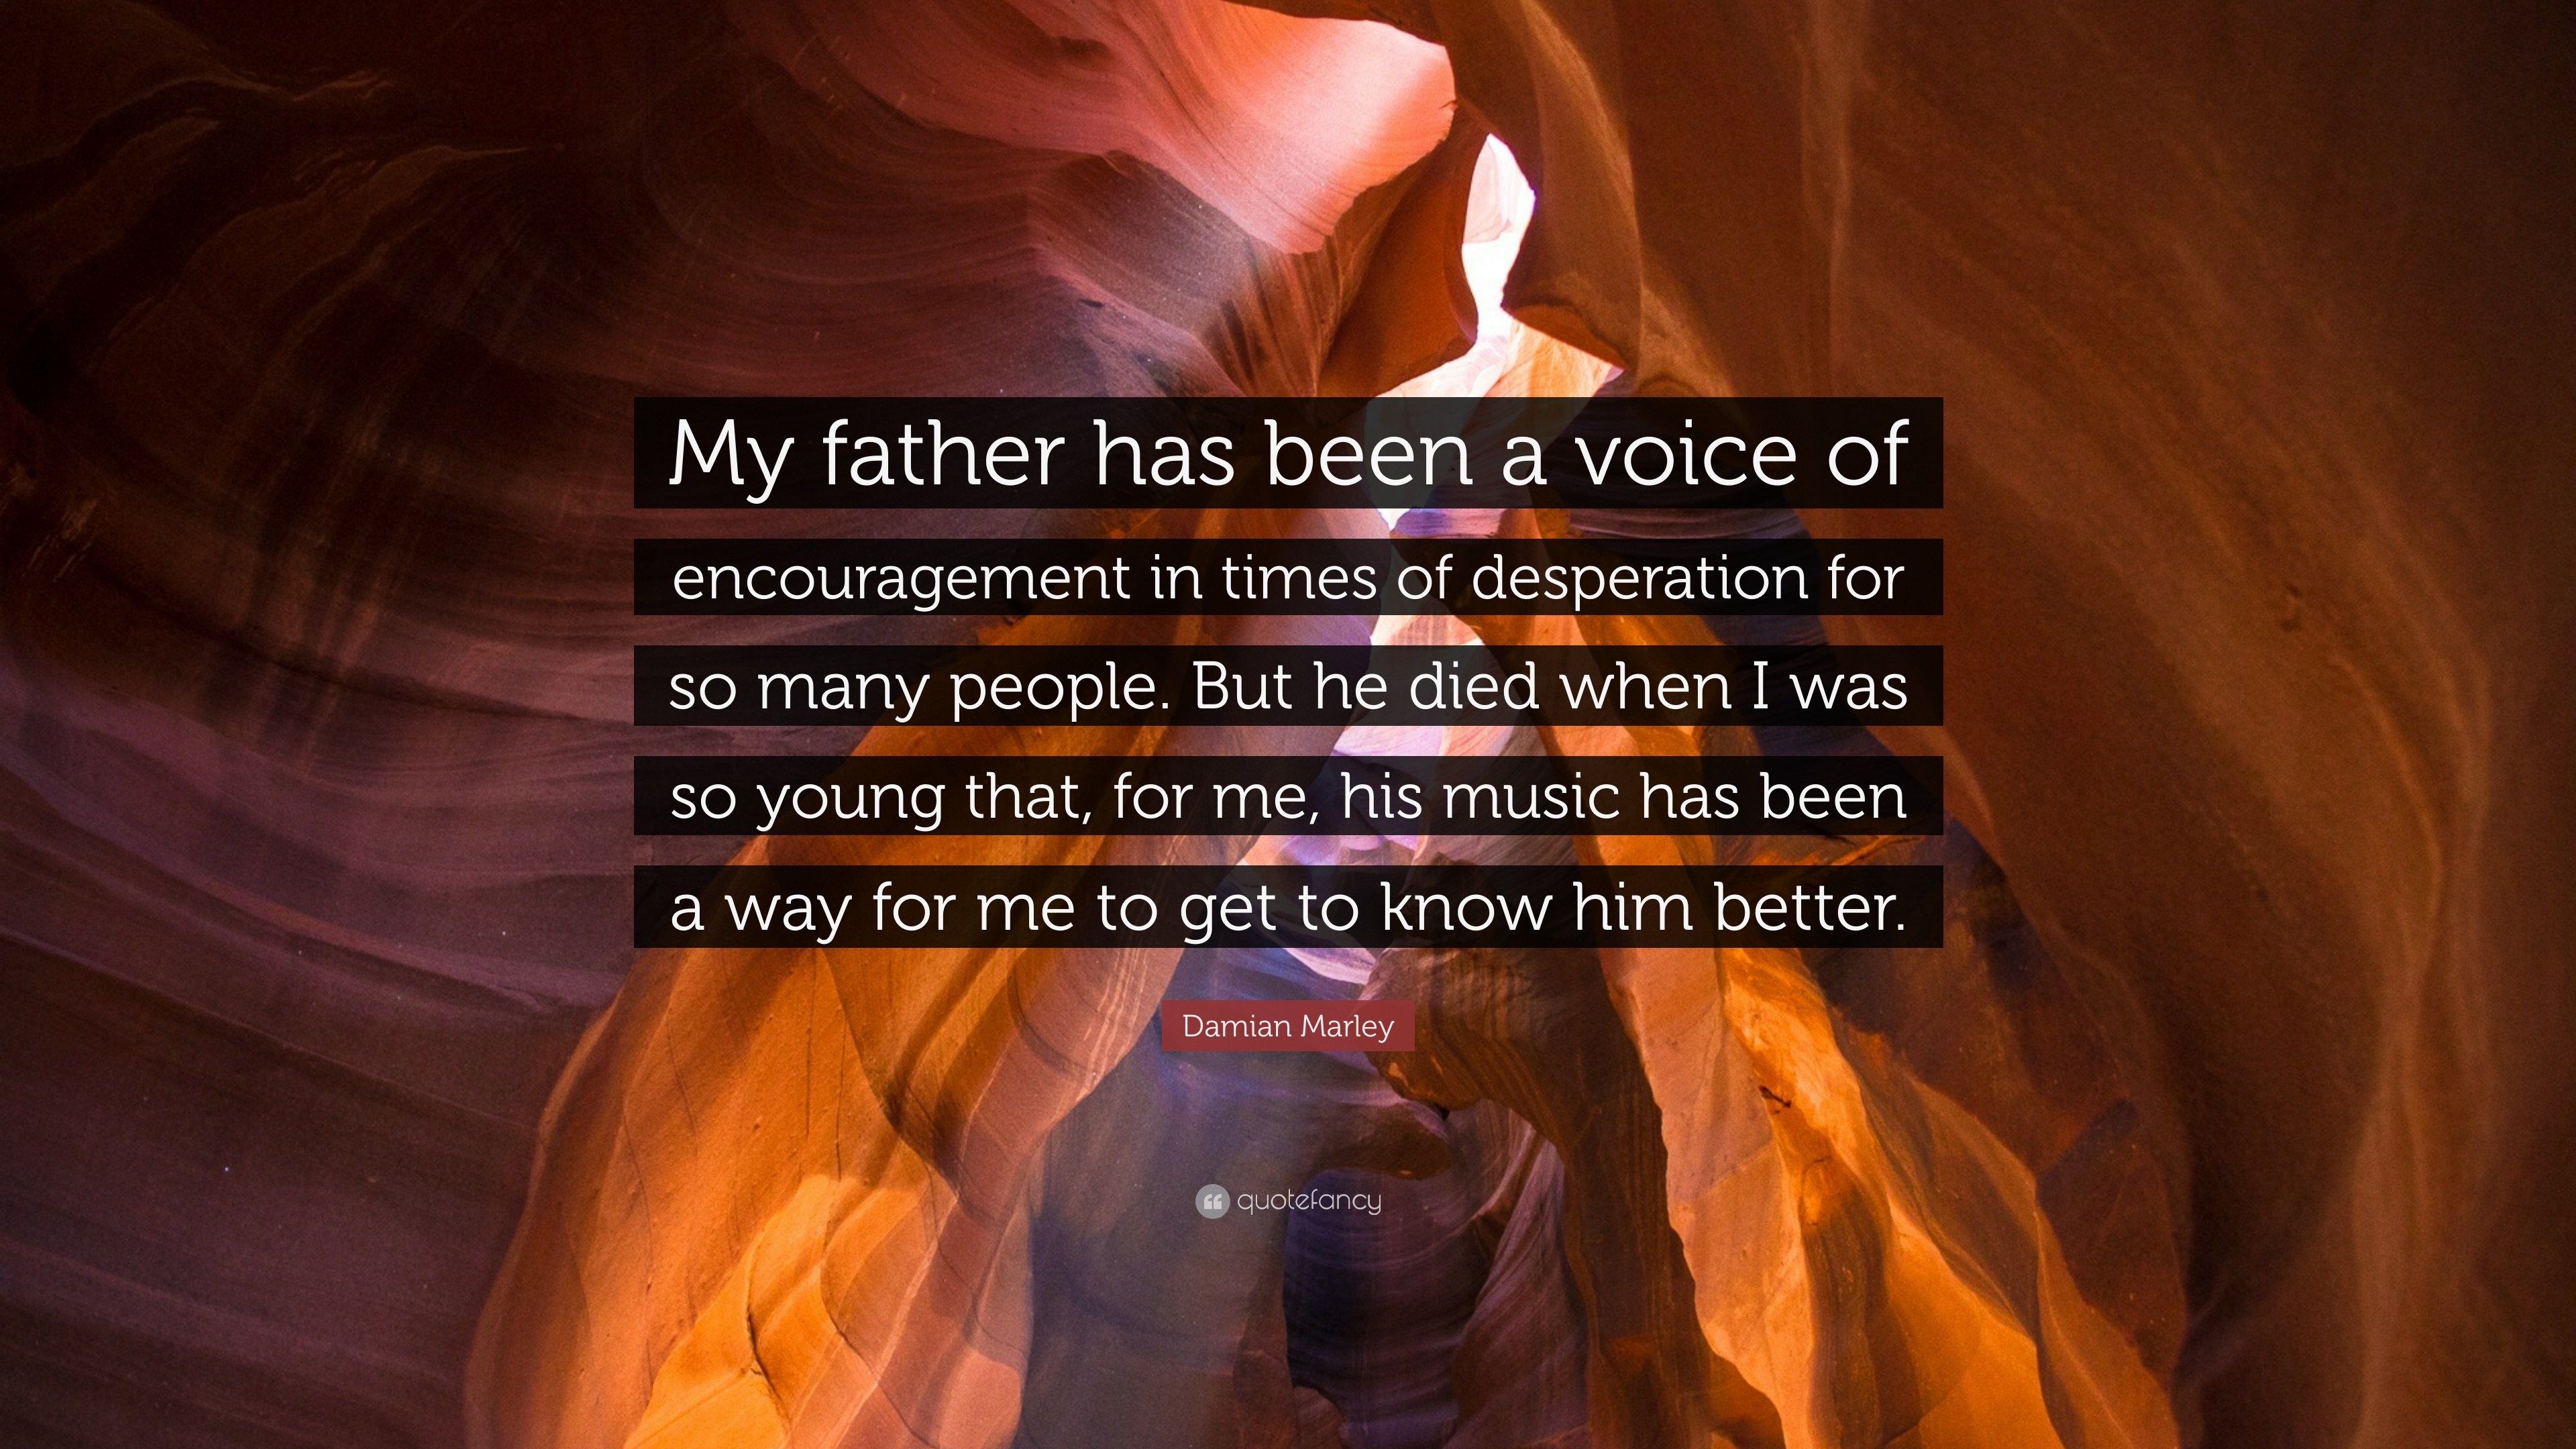 3840x2160 Damian Marley Quote: “My father has been a voice of encouragement in times  of